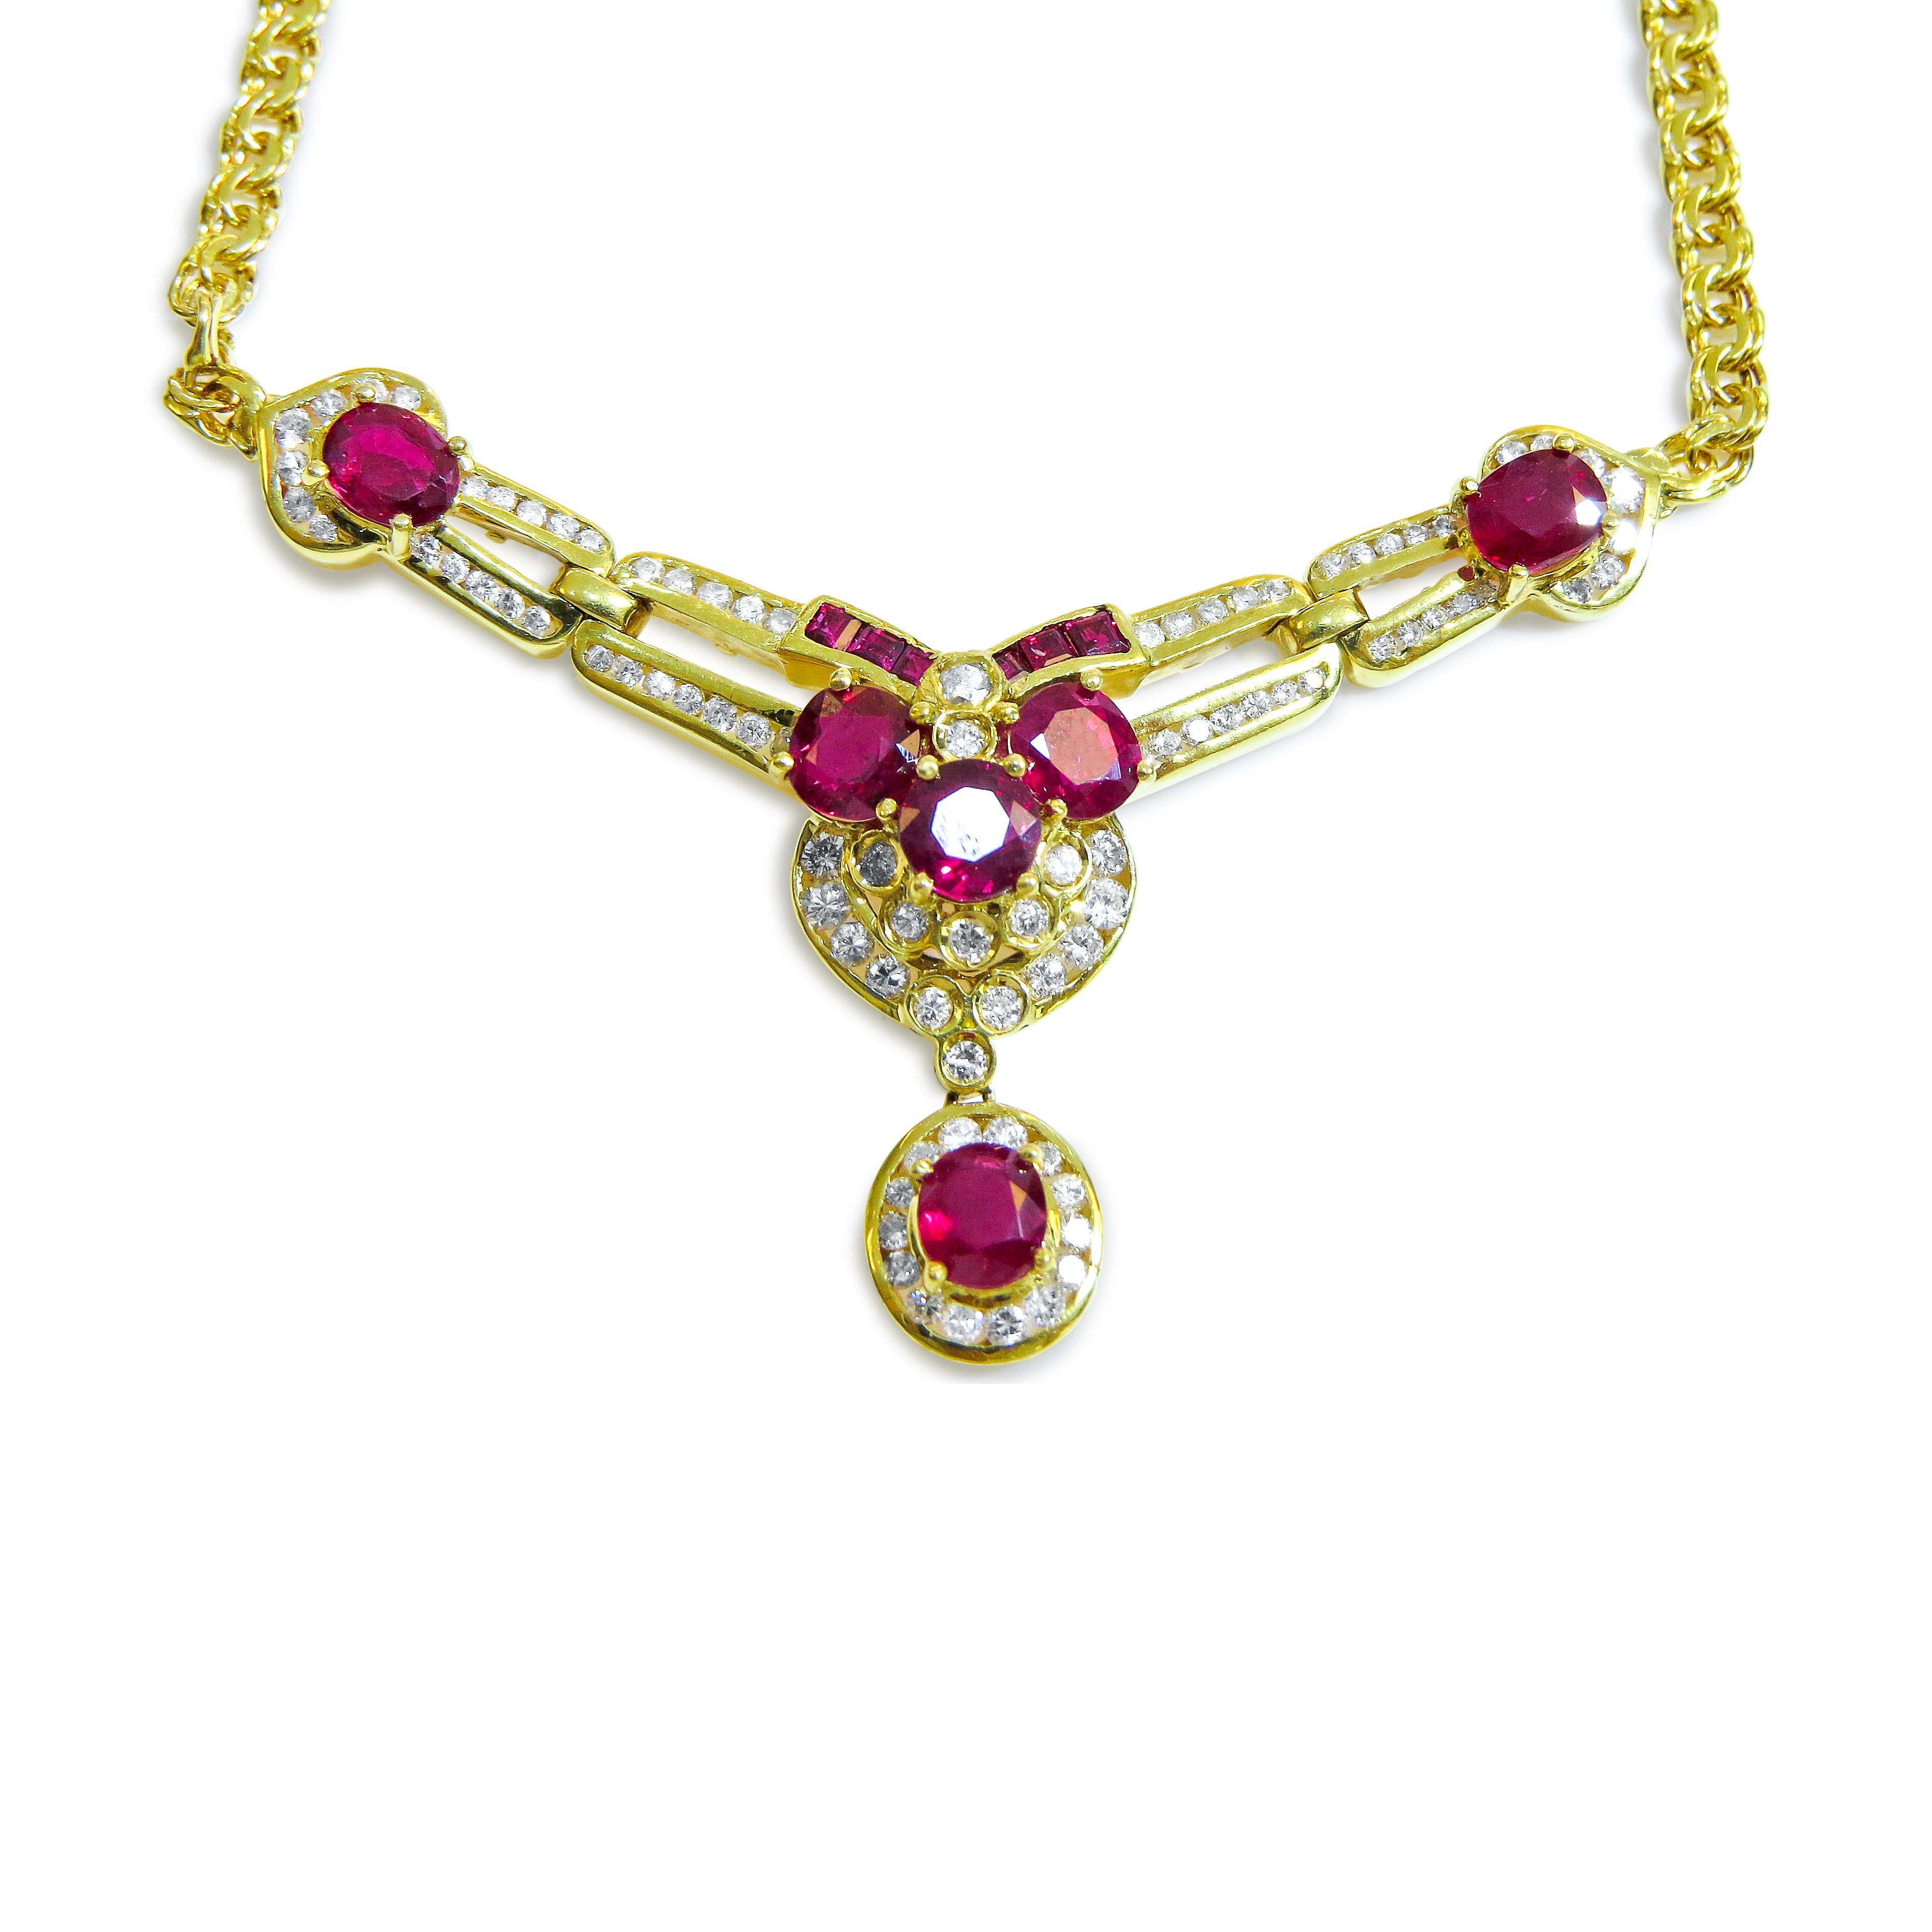 18K Yellow Gold 
Weight= 15.9gr 
Length= 17 Inches 
Diamond= 1.50Ct total 
Ruby= 5 Ct total
Year= 1980